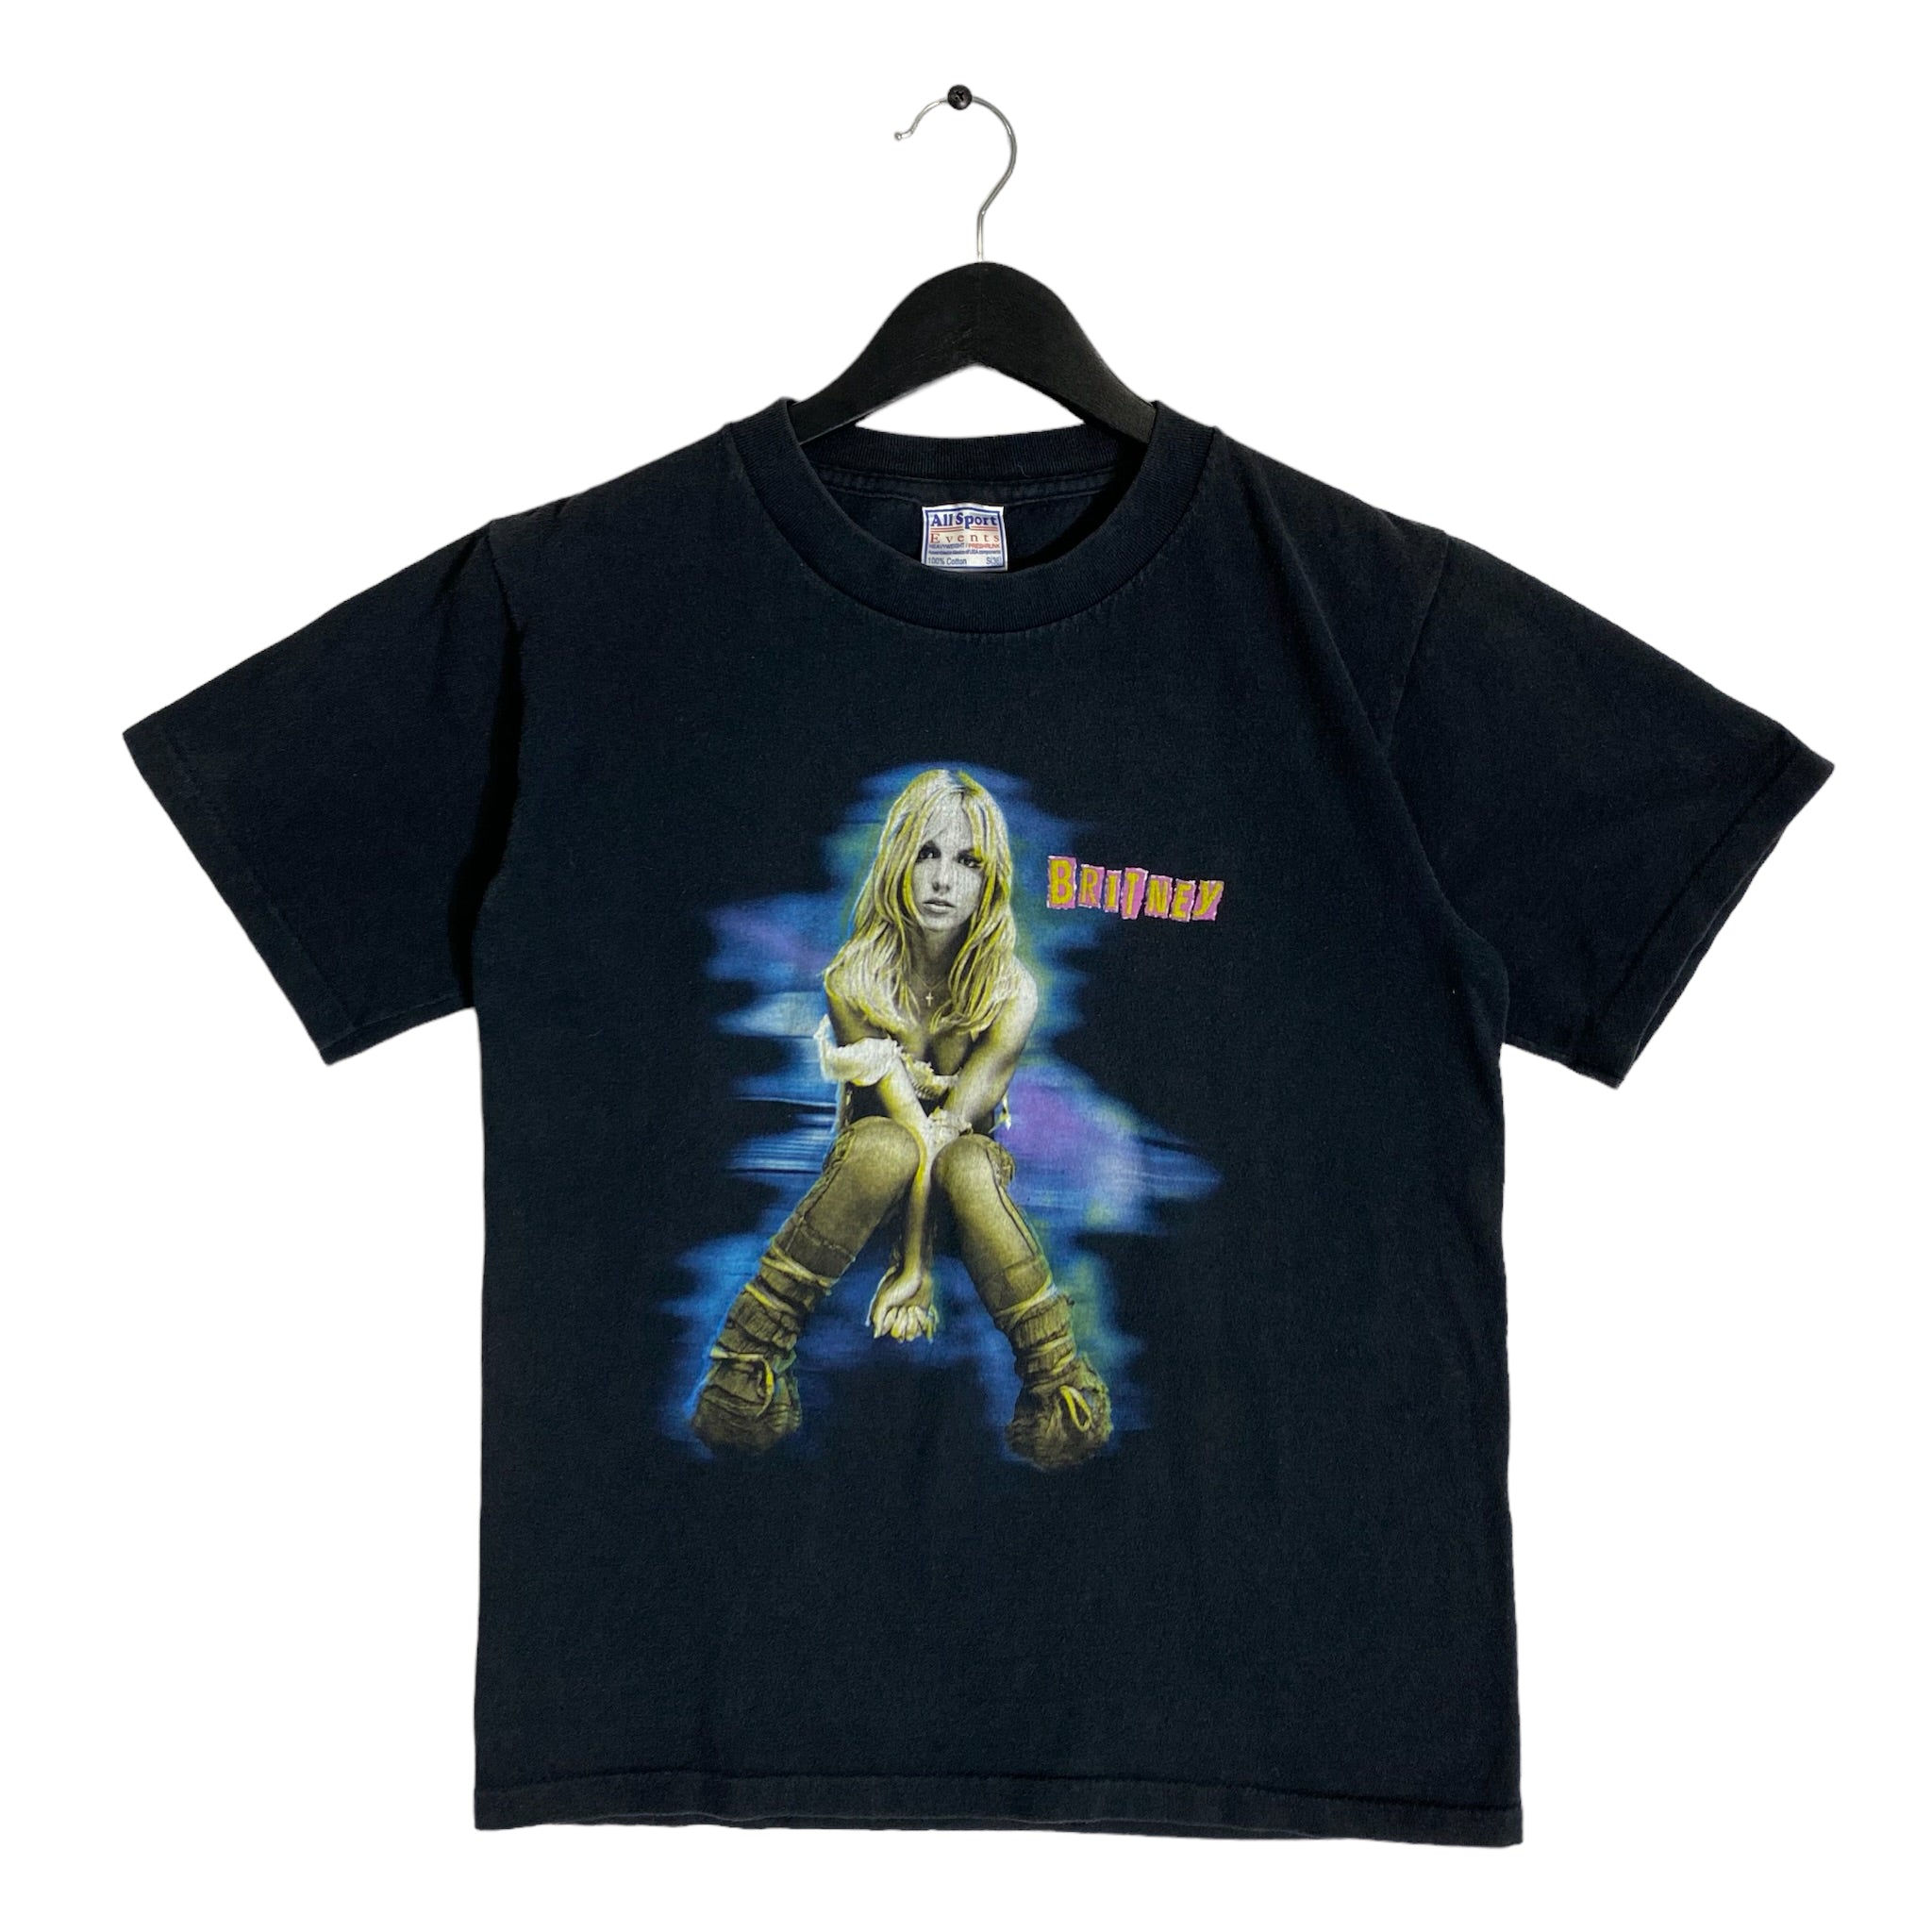 Vintage Britney Spears "The Britney Tour" Shirt 2001